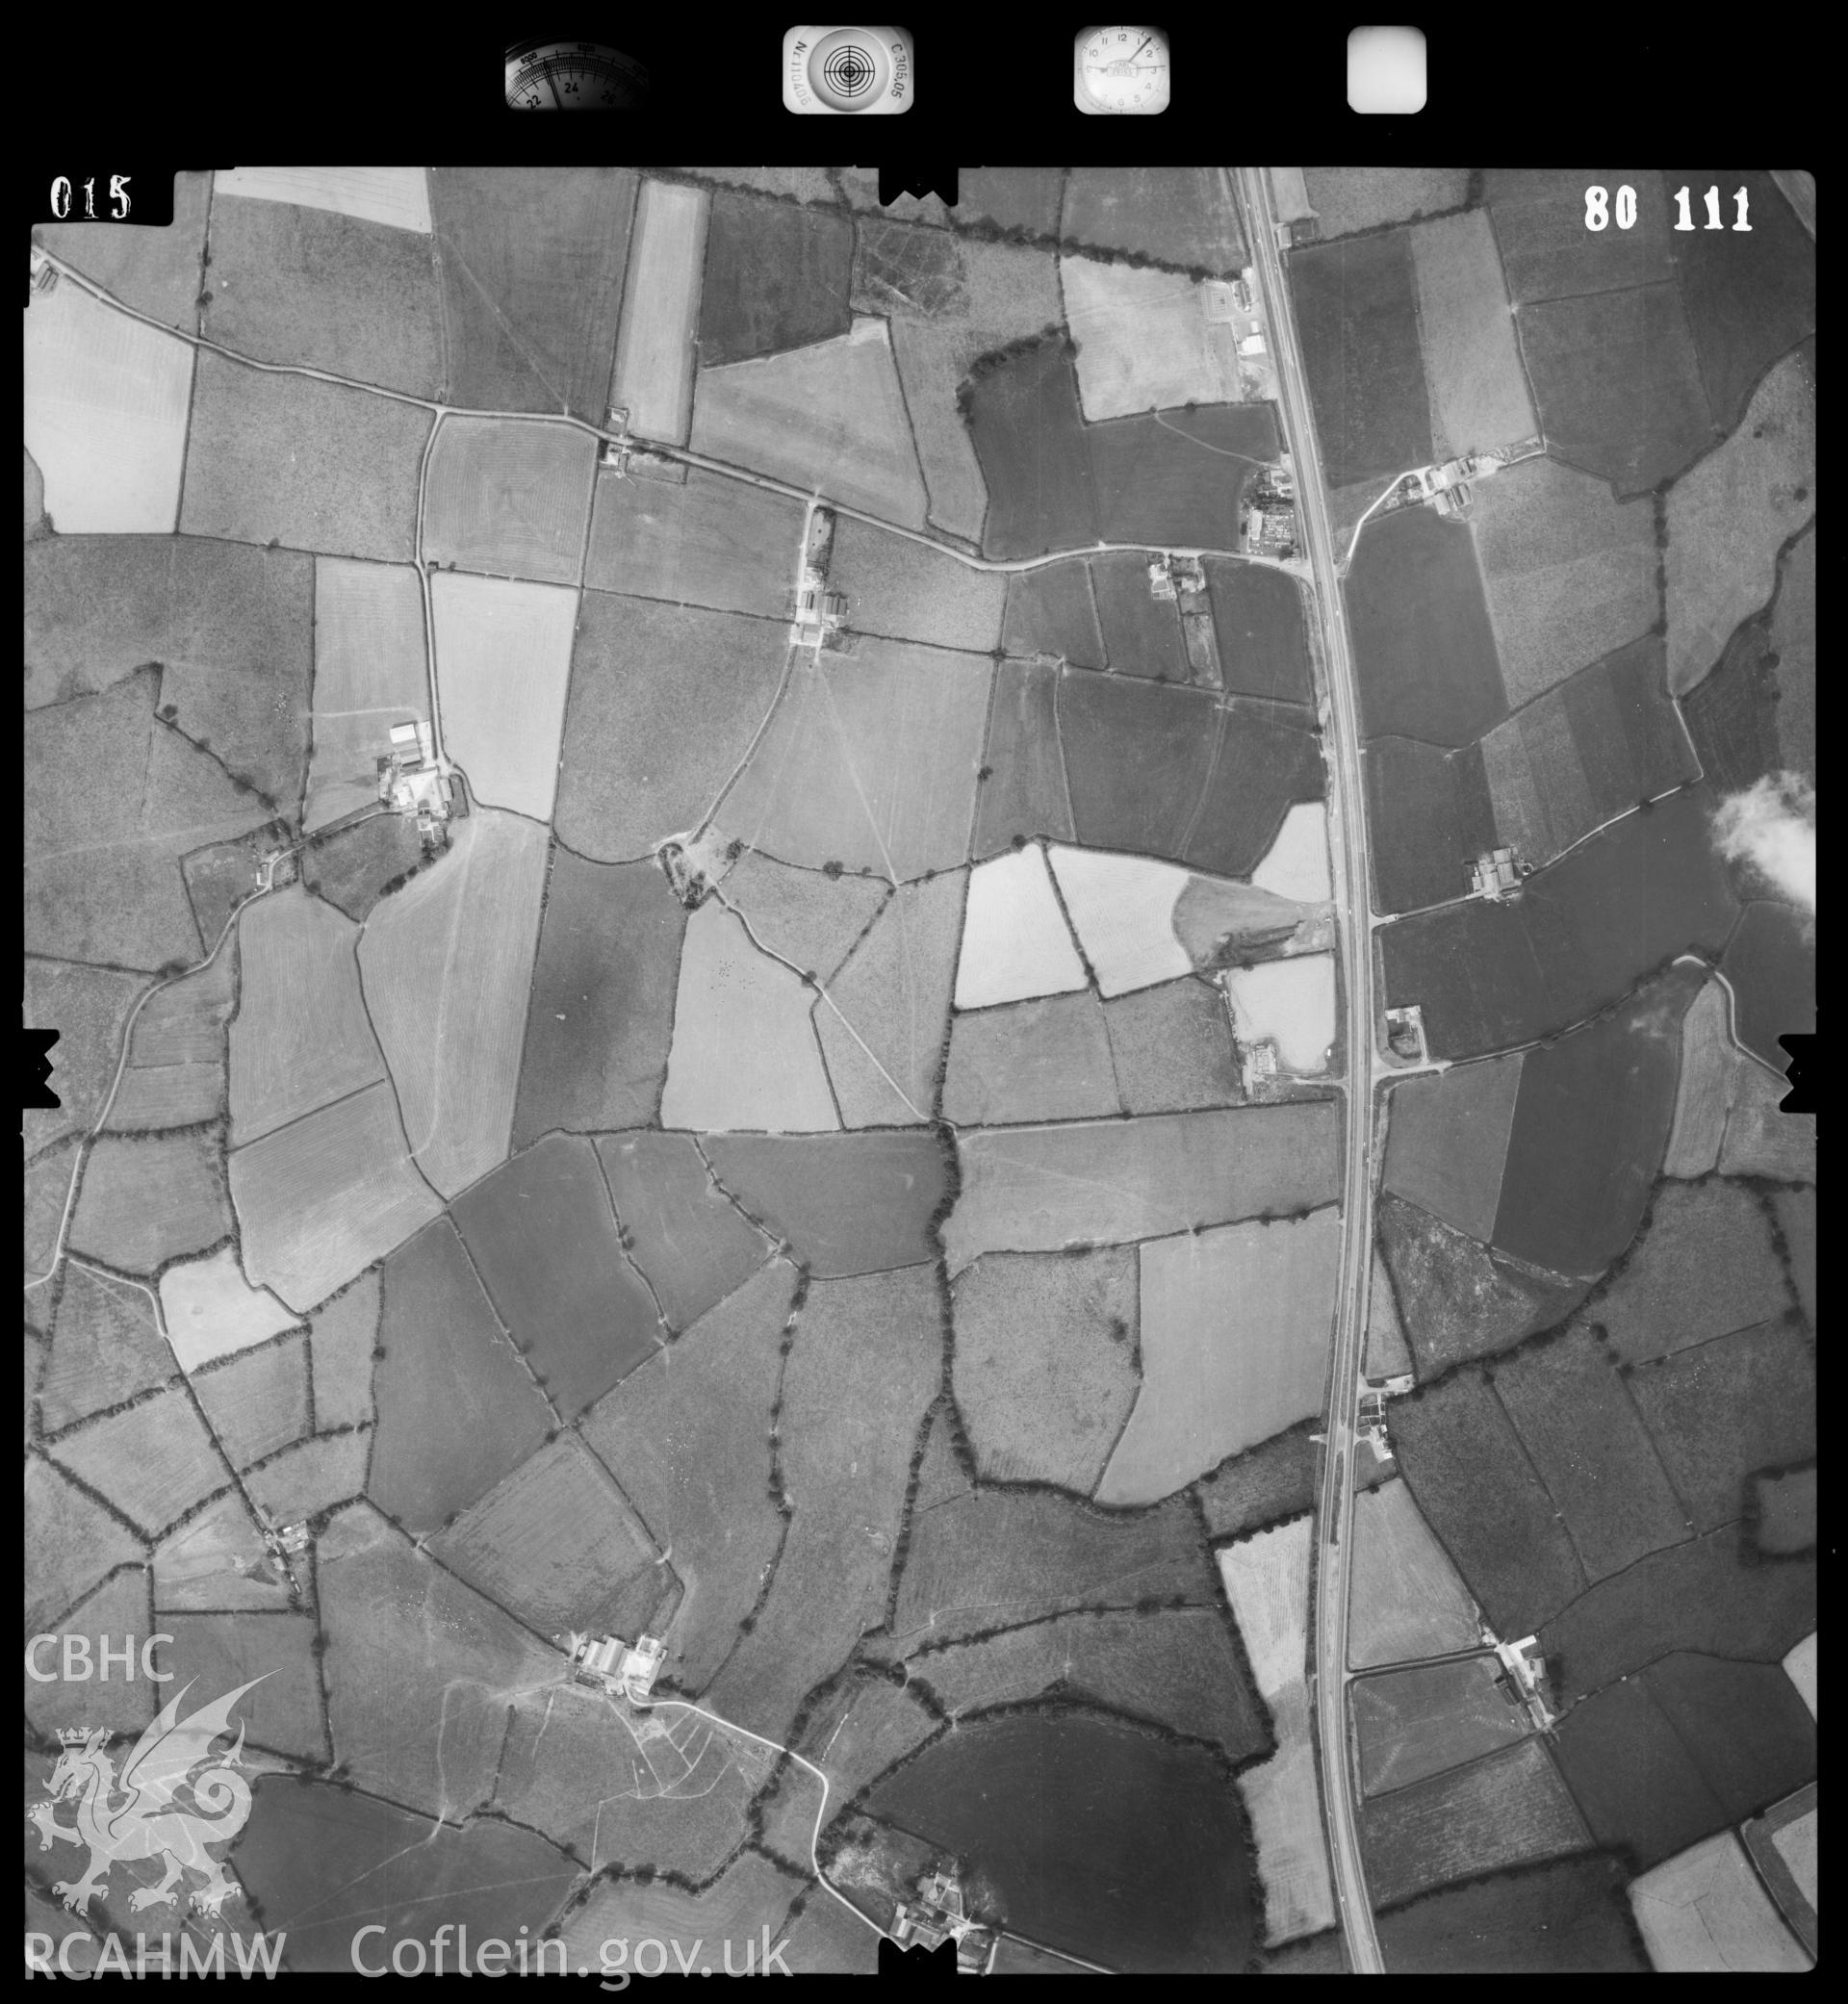 Digitized copy of an aerial photograph showing the St Clears area, taken by Ordnance Survey, 1980.